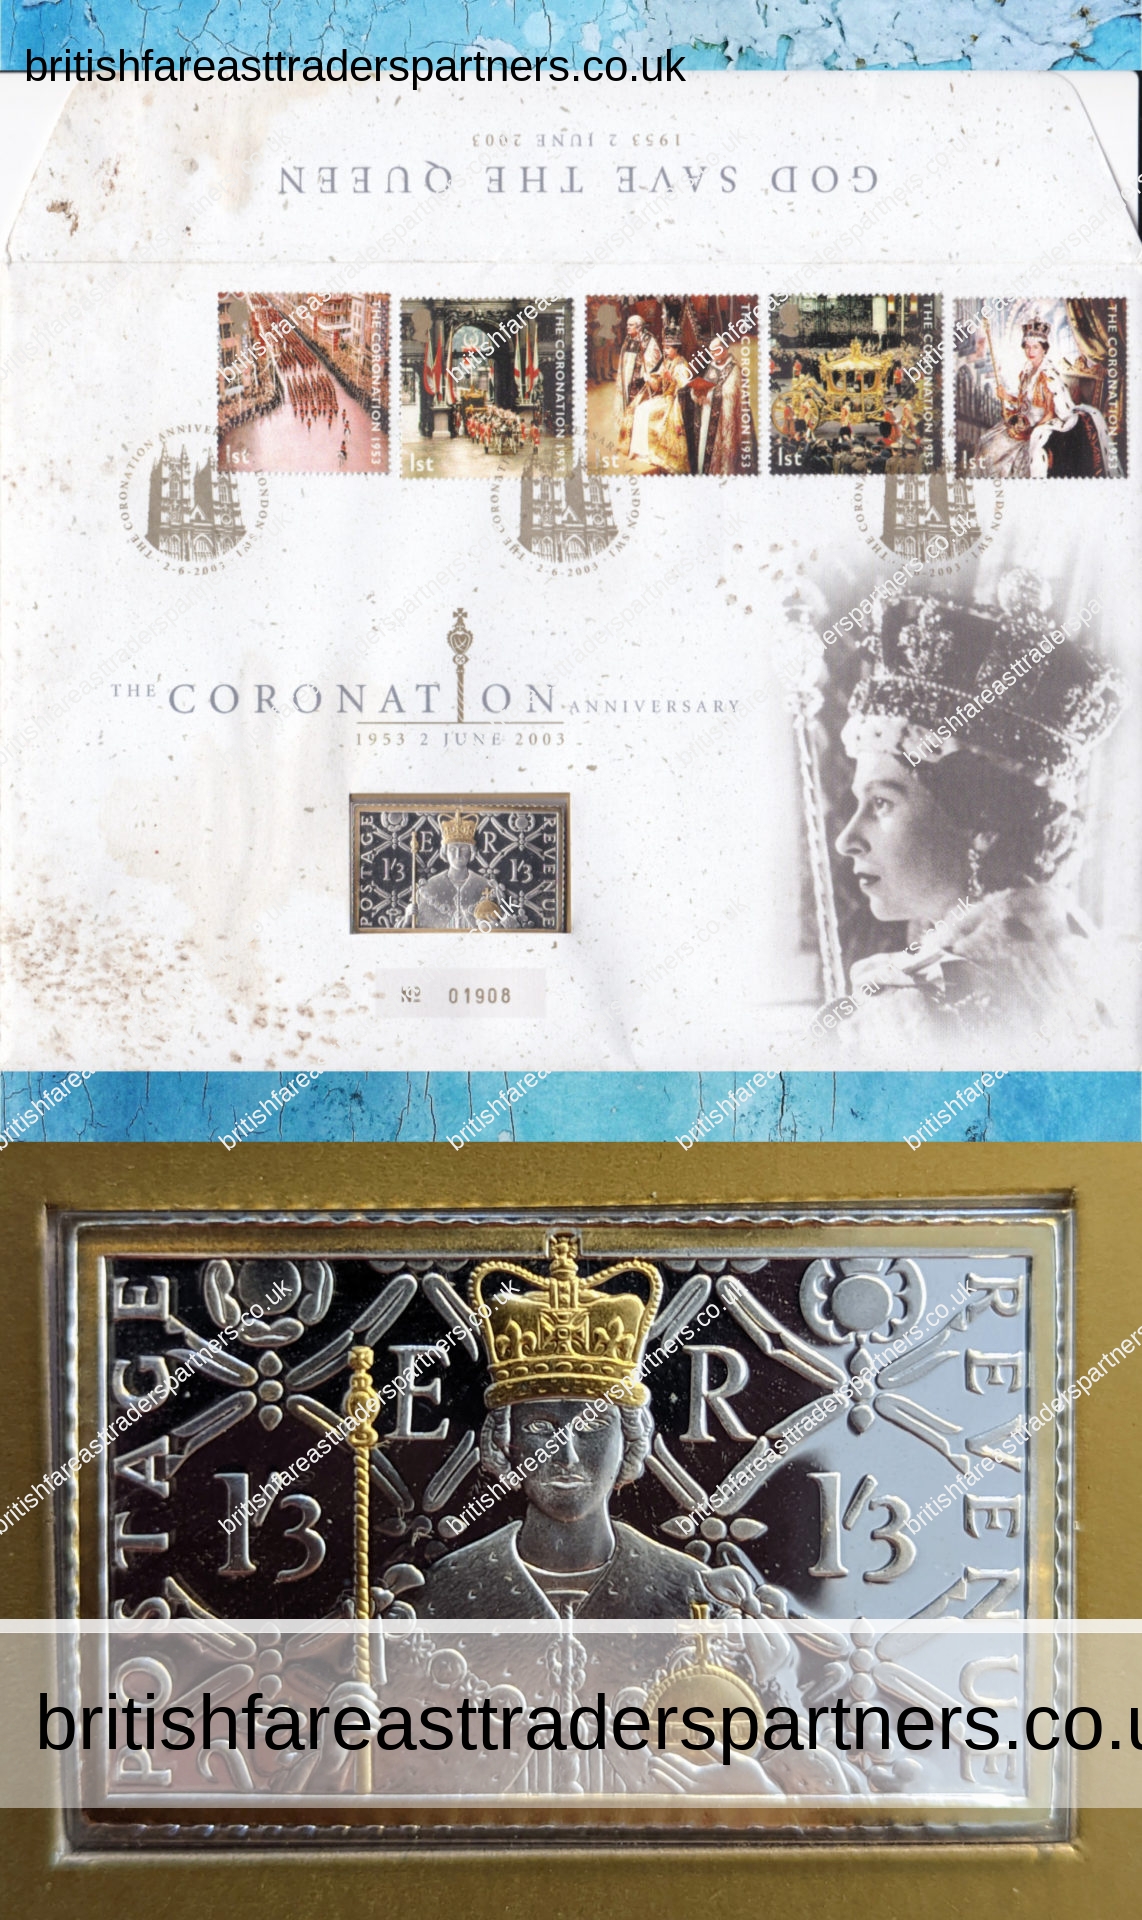 2003 LIMITED EDITION NO. 01908 of 5000 INGOT STAMP COVER ON ROYAL MAIL ENVELOPE COVER THE CORONATION ANNIVERSARY 2 JUNE 1953-2003 HM QUEEN ELIZABETH II STAMPS AND PHILATELY |ROYALTY | BRITISH ROYALTY | HISTORICAL MEMORABILIA ENGLAND / ENGLISH | UNITED KINGDOM | STAMPS | INGOTS | EPHEMERA CULTURE | HISTORY | HOBBIES SOCIETY | HERITAGE | LIFESTYLE